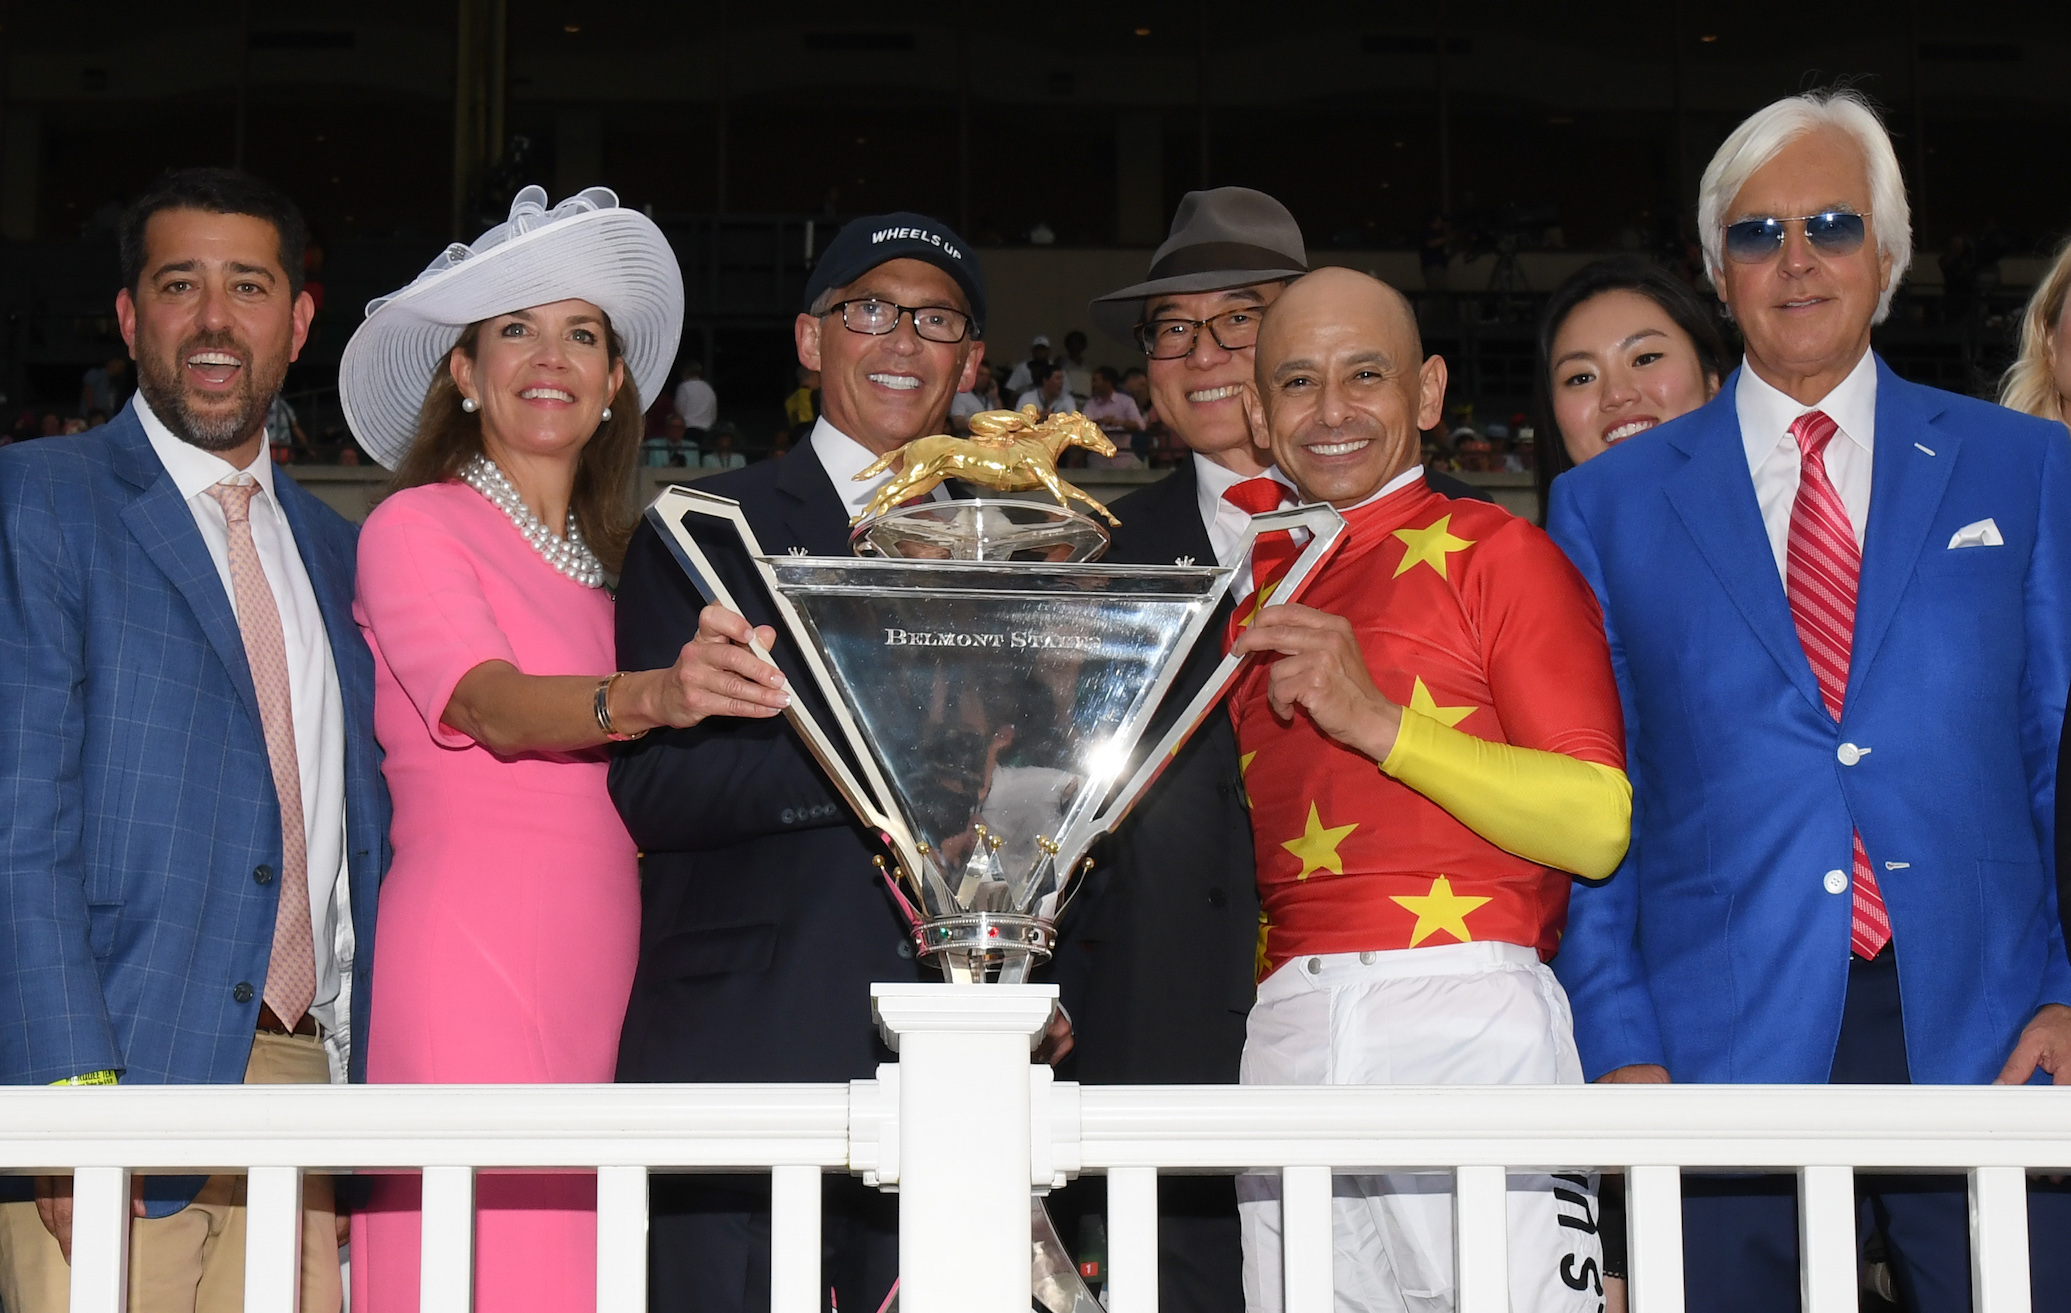 That winning feeling: ownership partners Sol Kumin (Head of Plains Partners), Lisa and Kenny Troutt (WinStar Farms) and Teo Ah Khing (China Horse Club) with Mike Smith and Bob Baffert - and the Belmont trophy. Photo: Adam Conglianese/NYRA.com